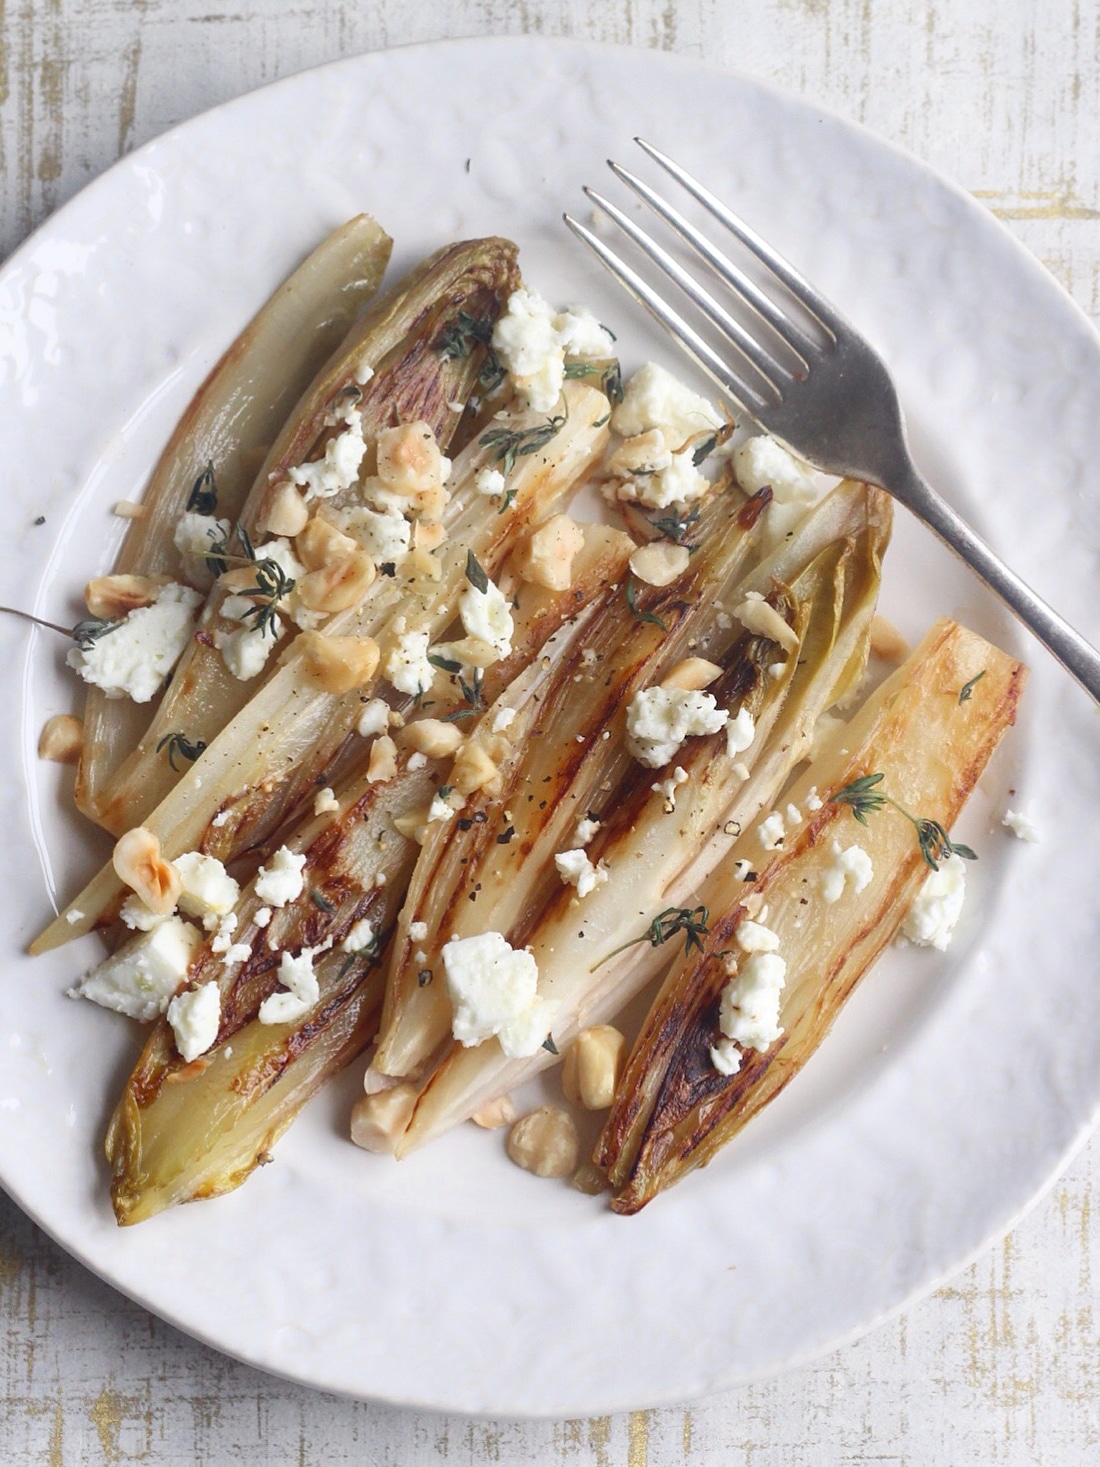 Pan-fried chicory with feta and hazelnuts